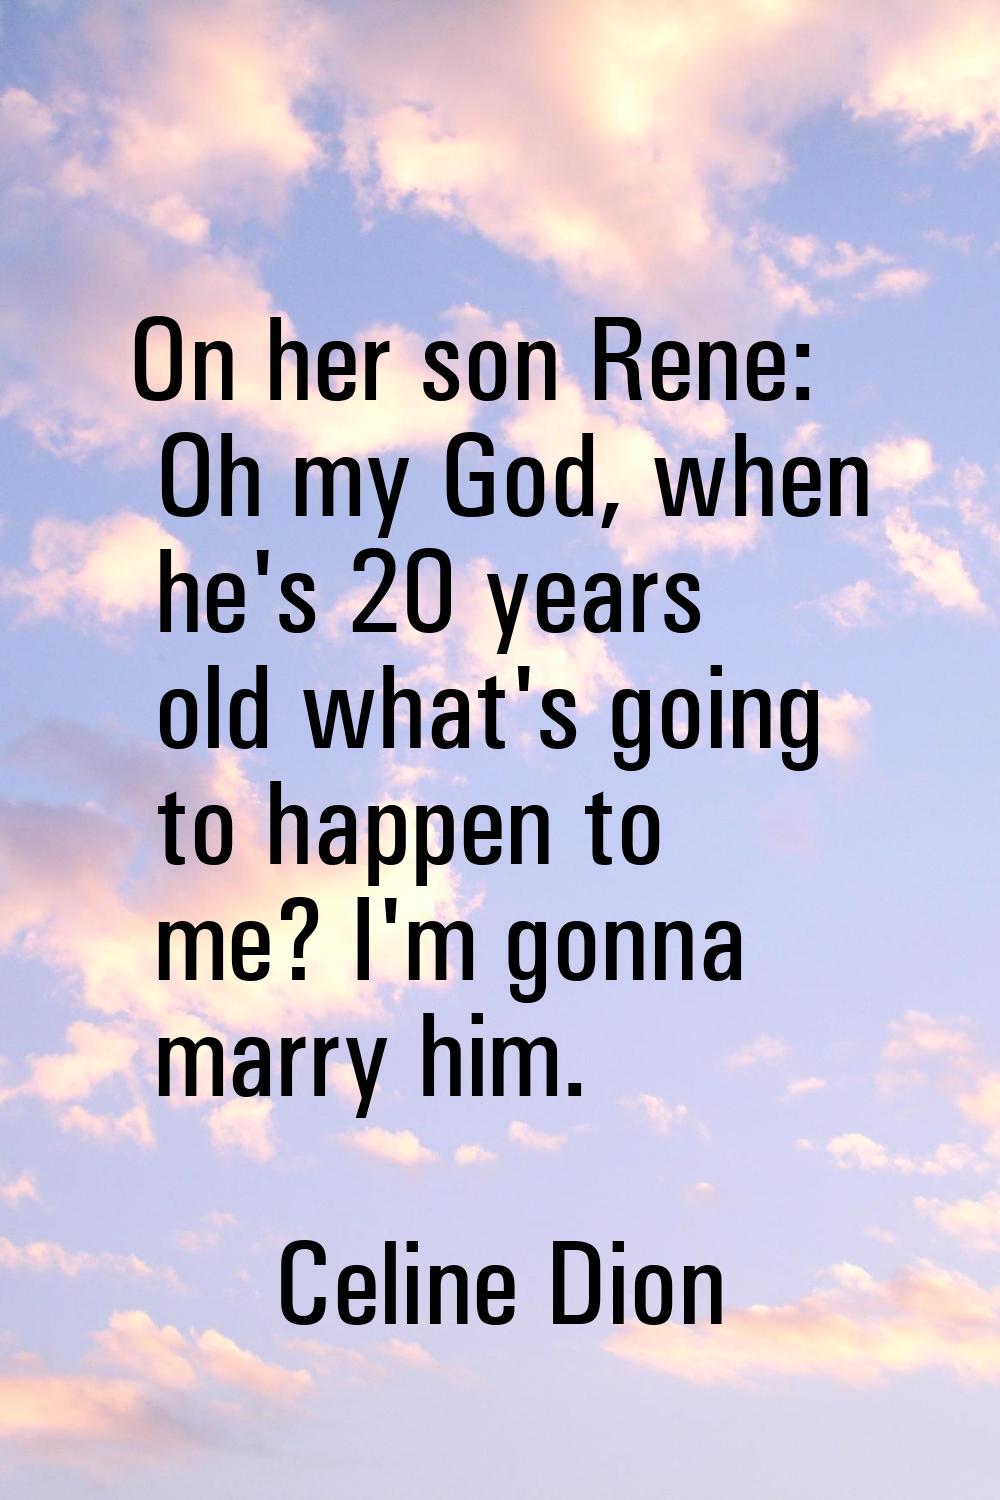 On her son Rene: Oh my God, when he's 20 years old what's going to happen to me? I'm gonna marry hi